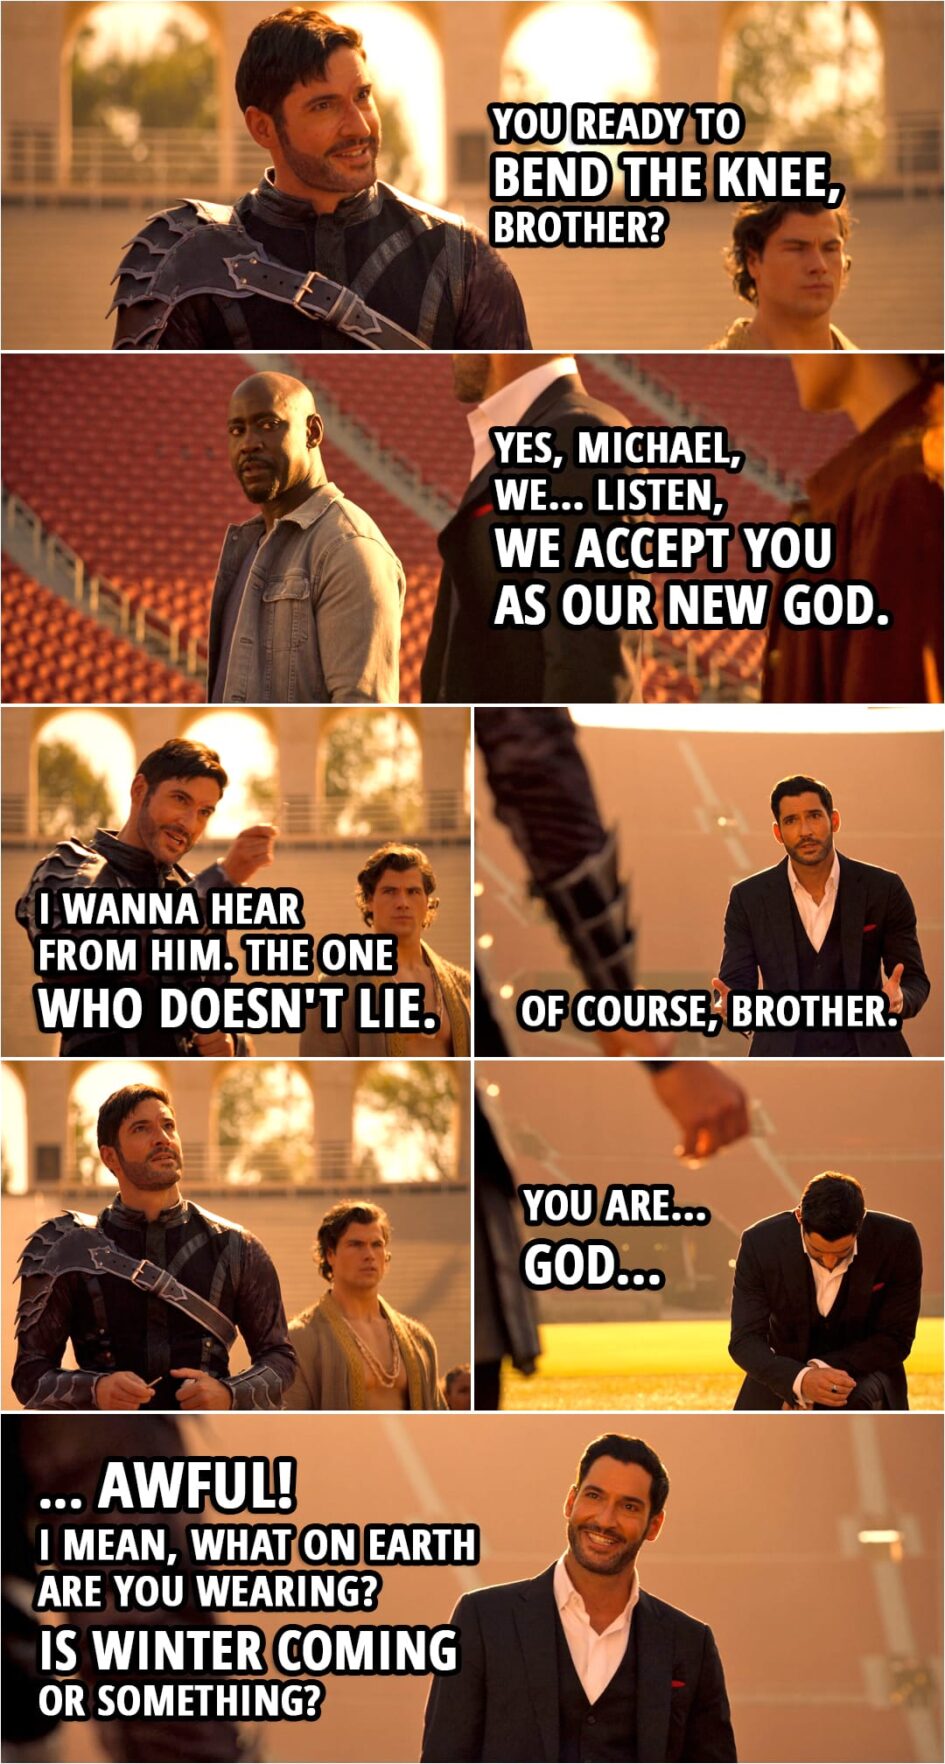 Quote from Lucifer 5x16 | Michael: You ready to bend the knee, brother? Amenadiel: Yes, Michael, we... Listen, we accept you as our new God. Michael: Do you? I wanna hear from him. (points to Lucifer) The one who doesn't lie. Lucifer Morningstar: Of course, brother. You are... God... awful! I mean, what on Earth are you wearing? Is winter coming or something?